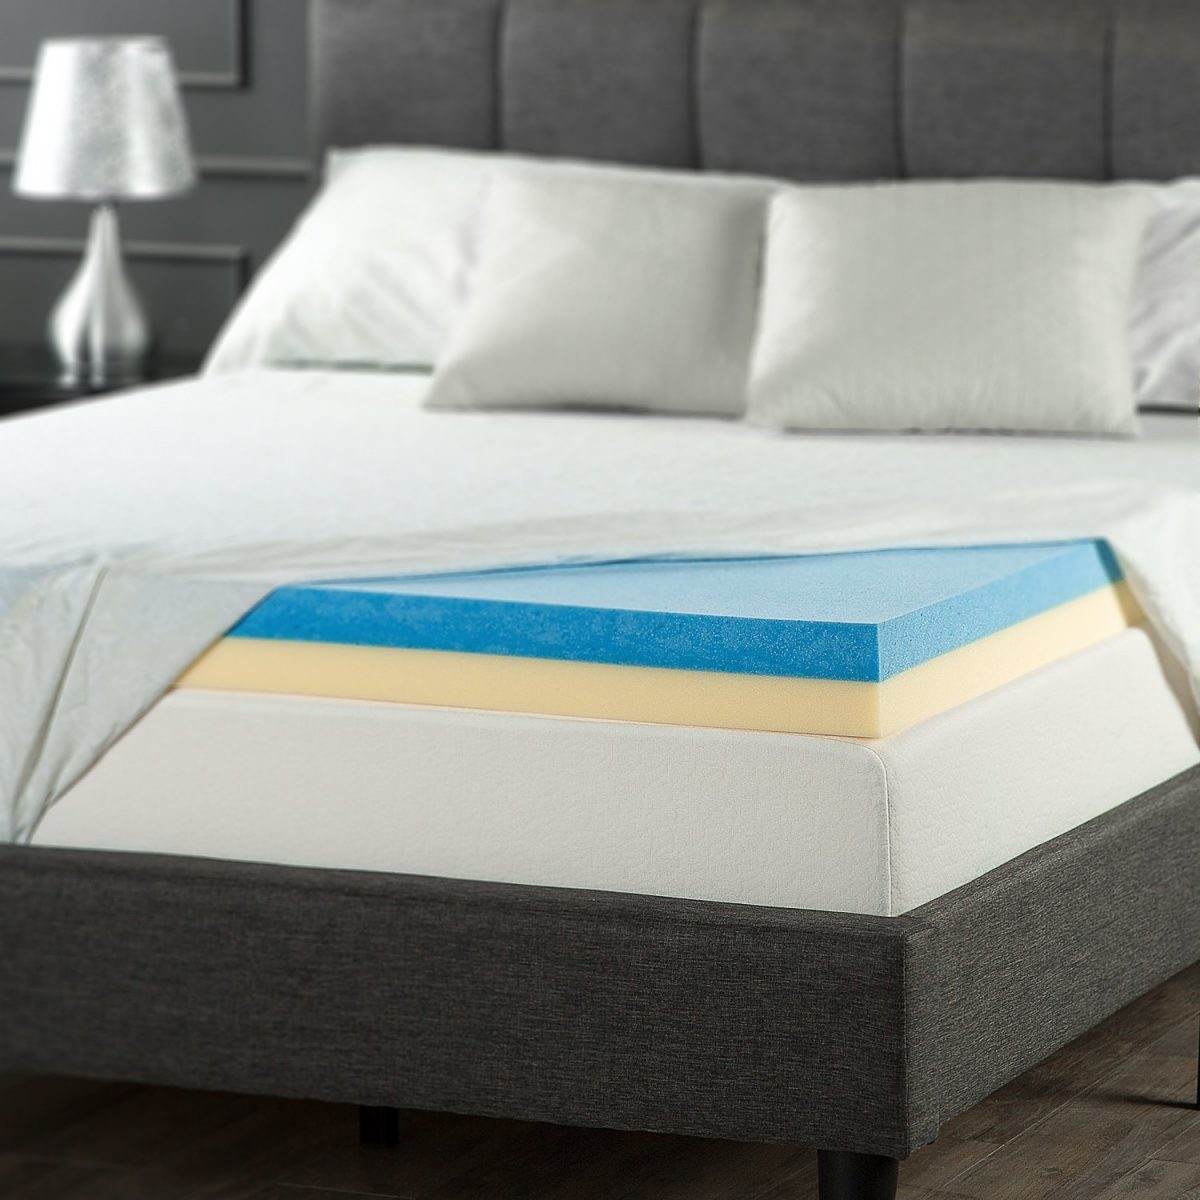 how effictive are cooling mattress